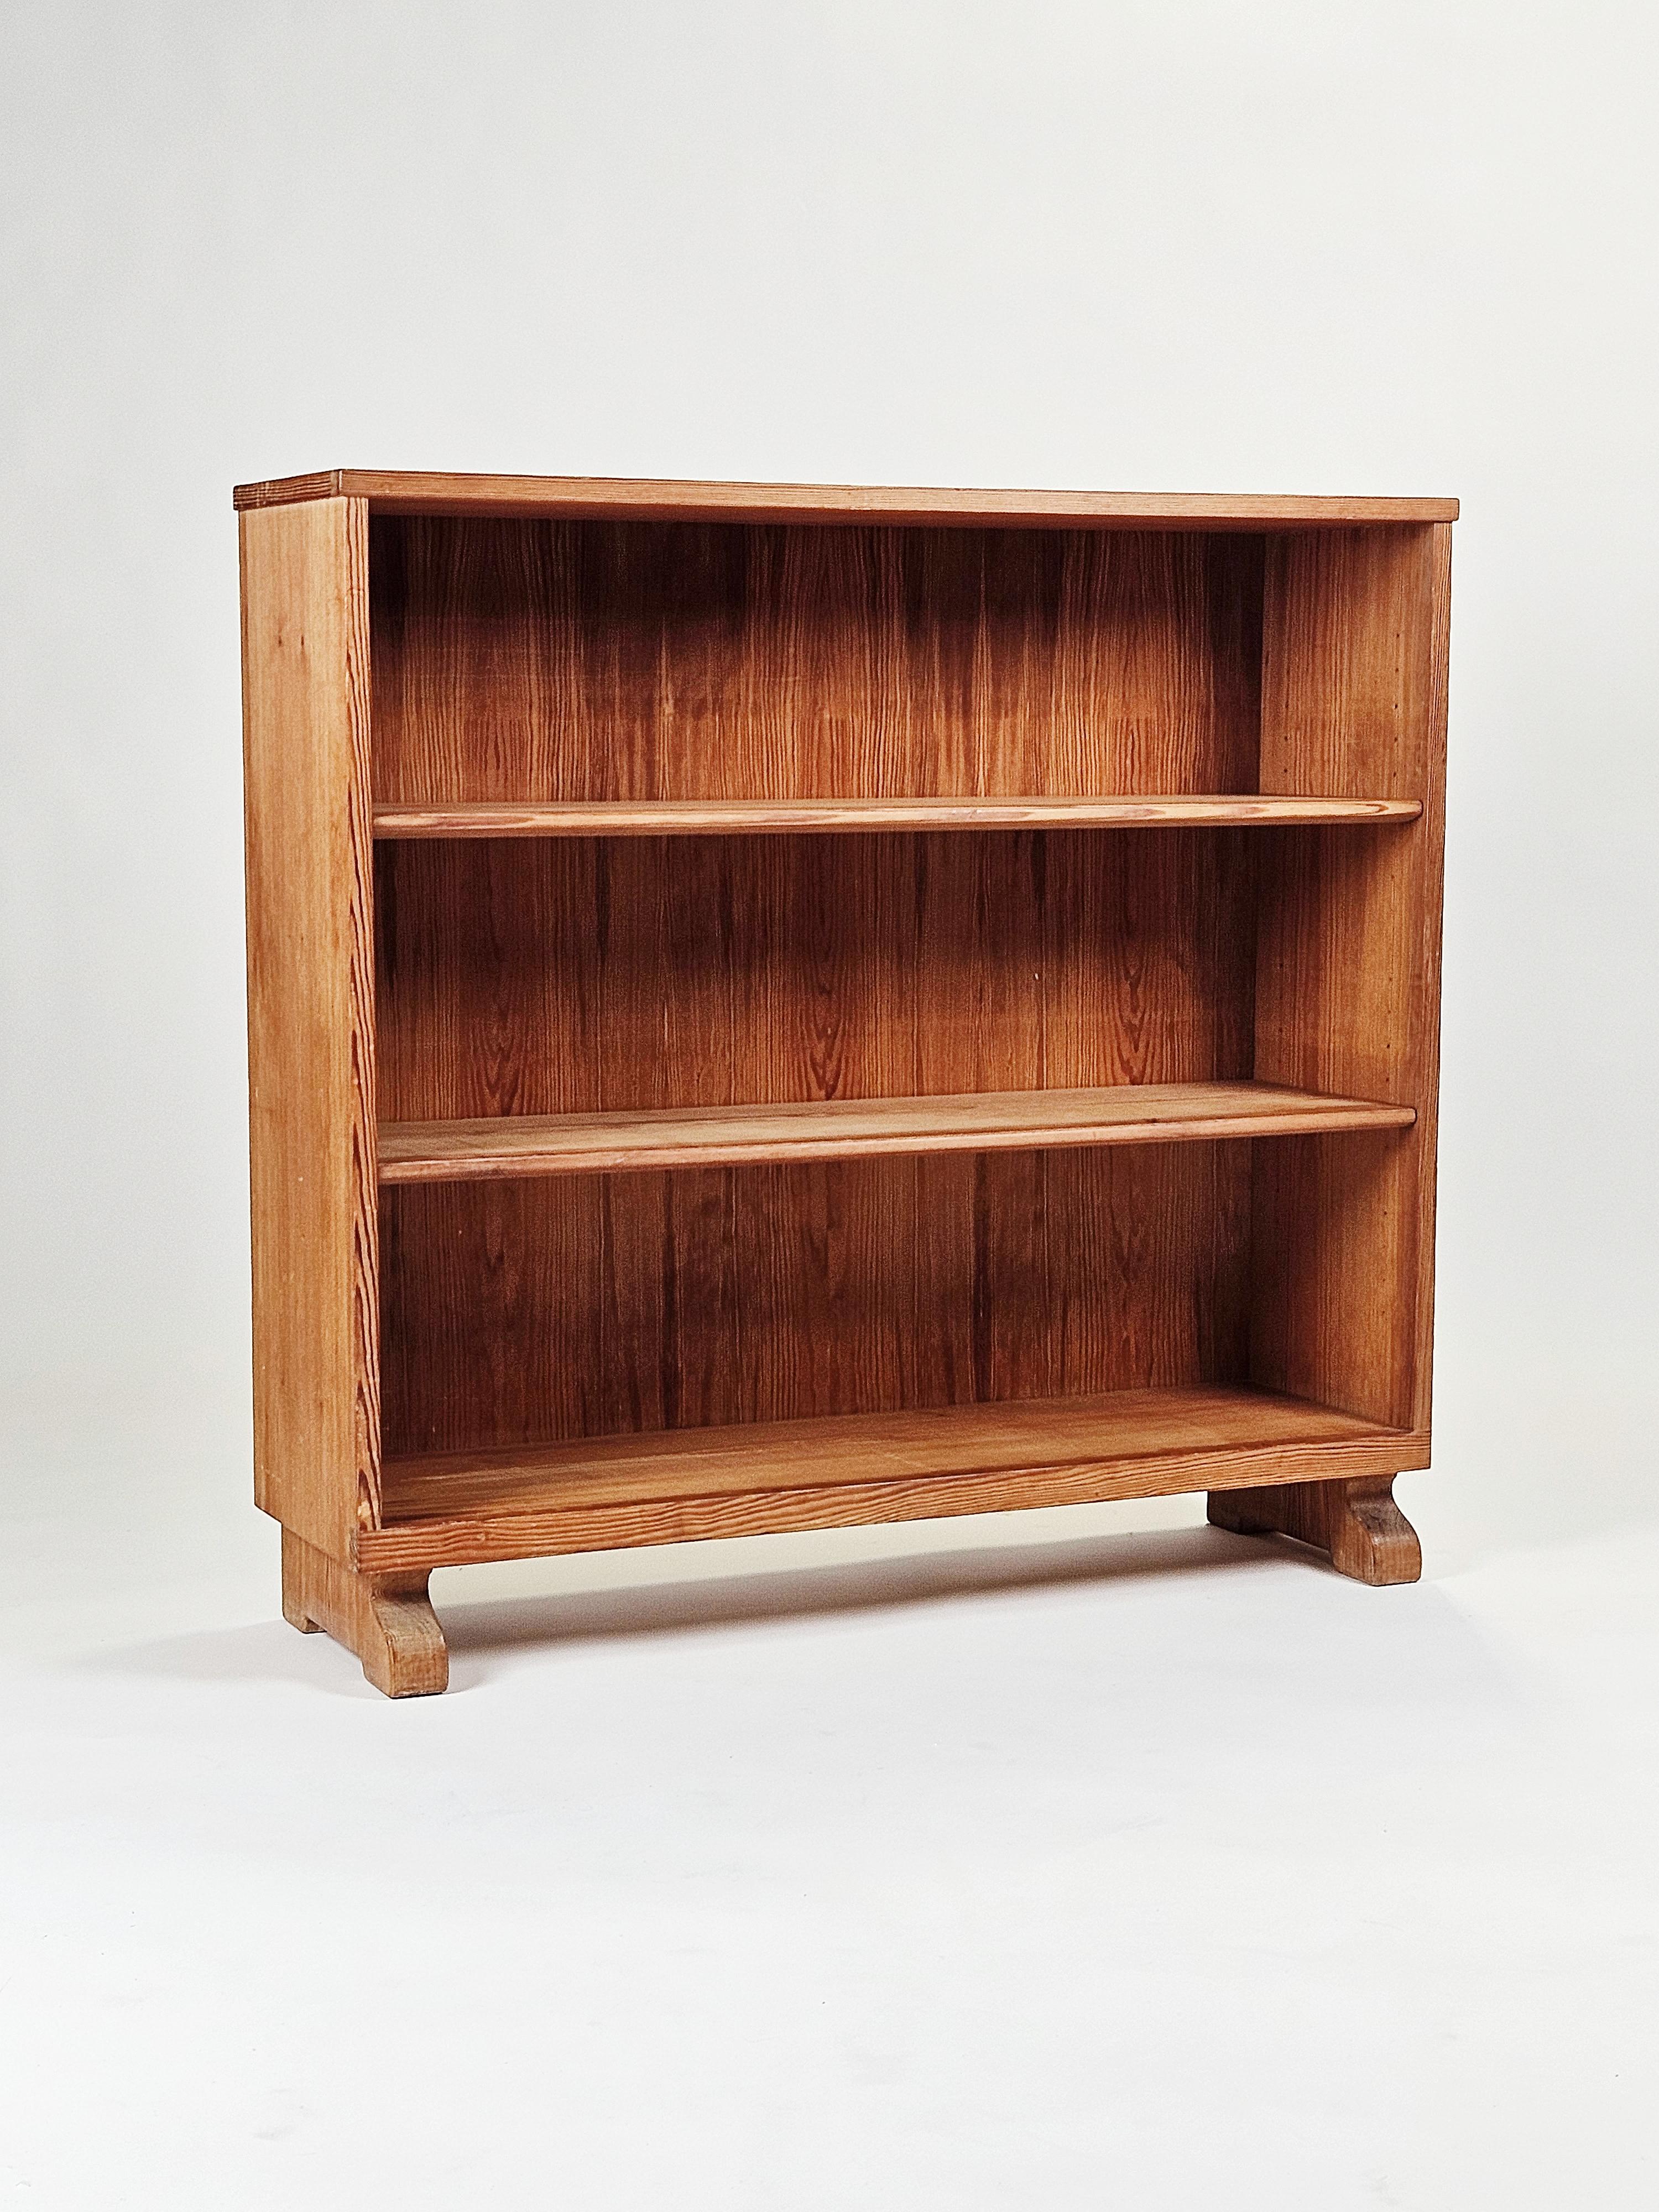 Rare pine bookcase designed by Carl Malmsten. Produced in Sweden during the 1950s. 

A beautiful piece of so called Swedish sports cabin furniture. 